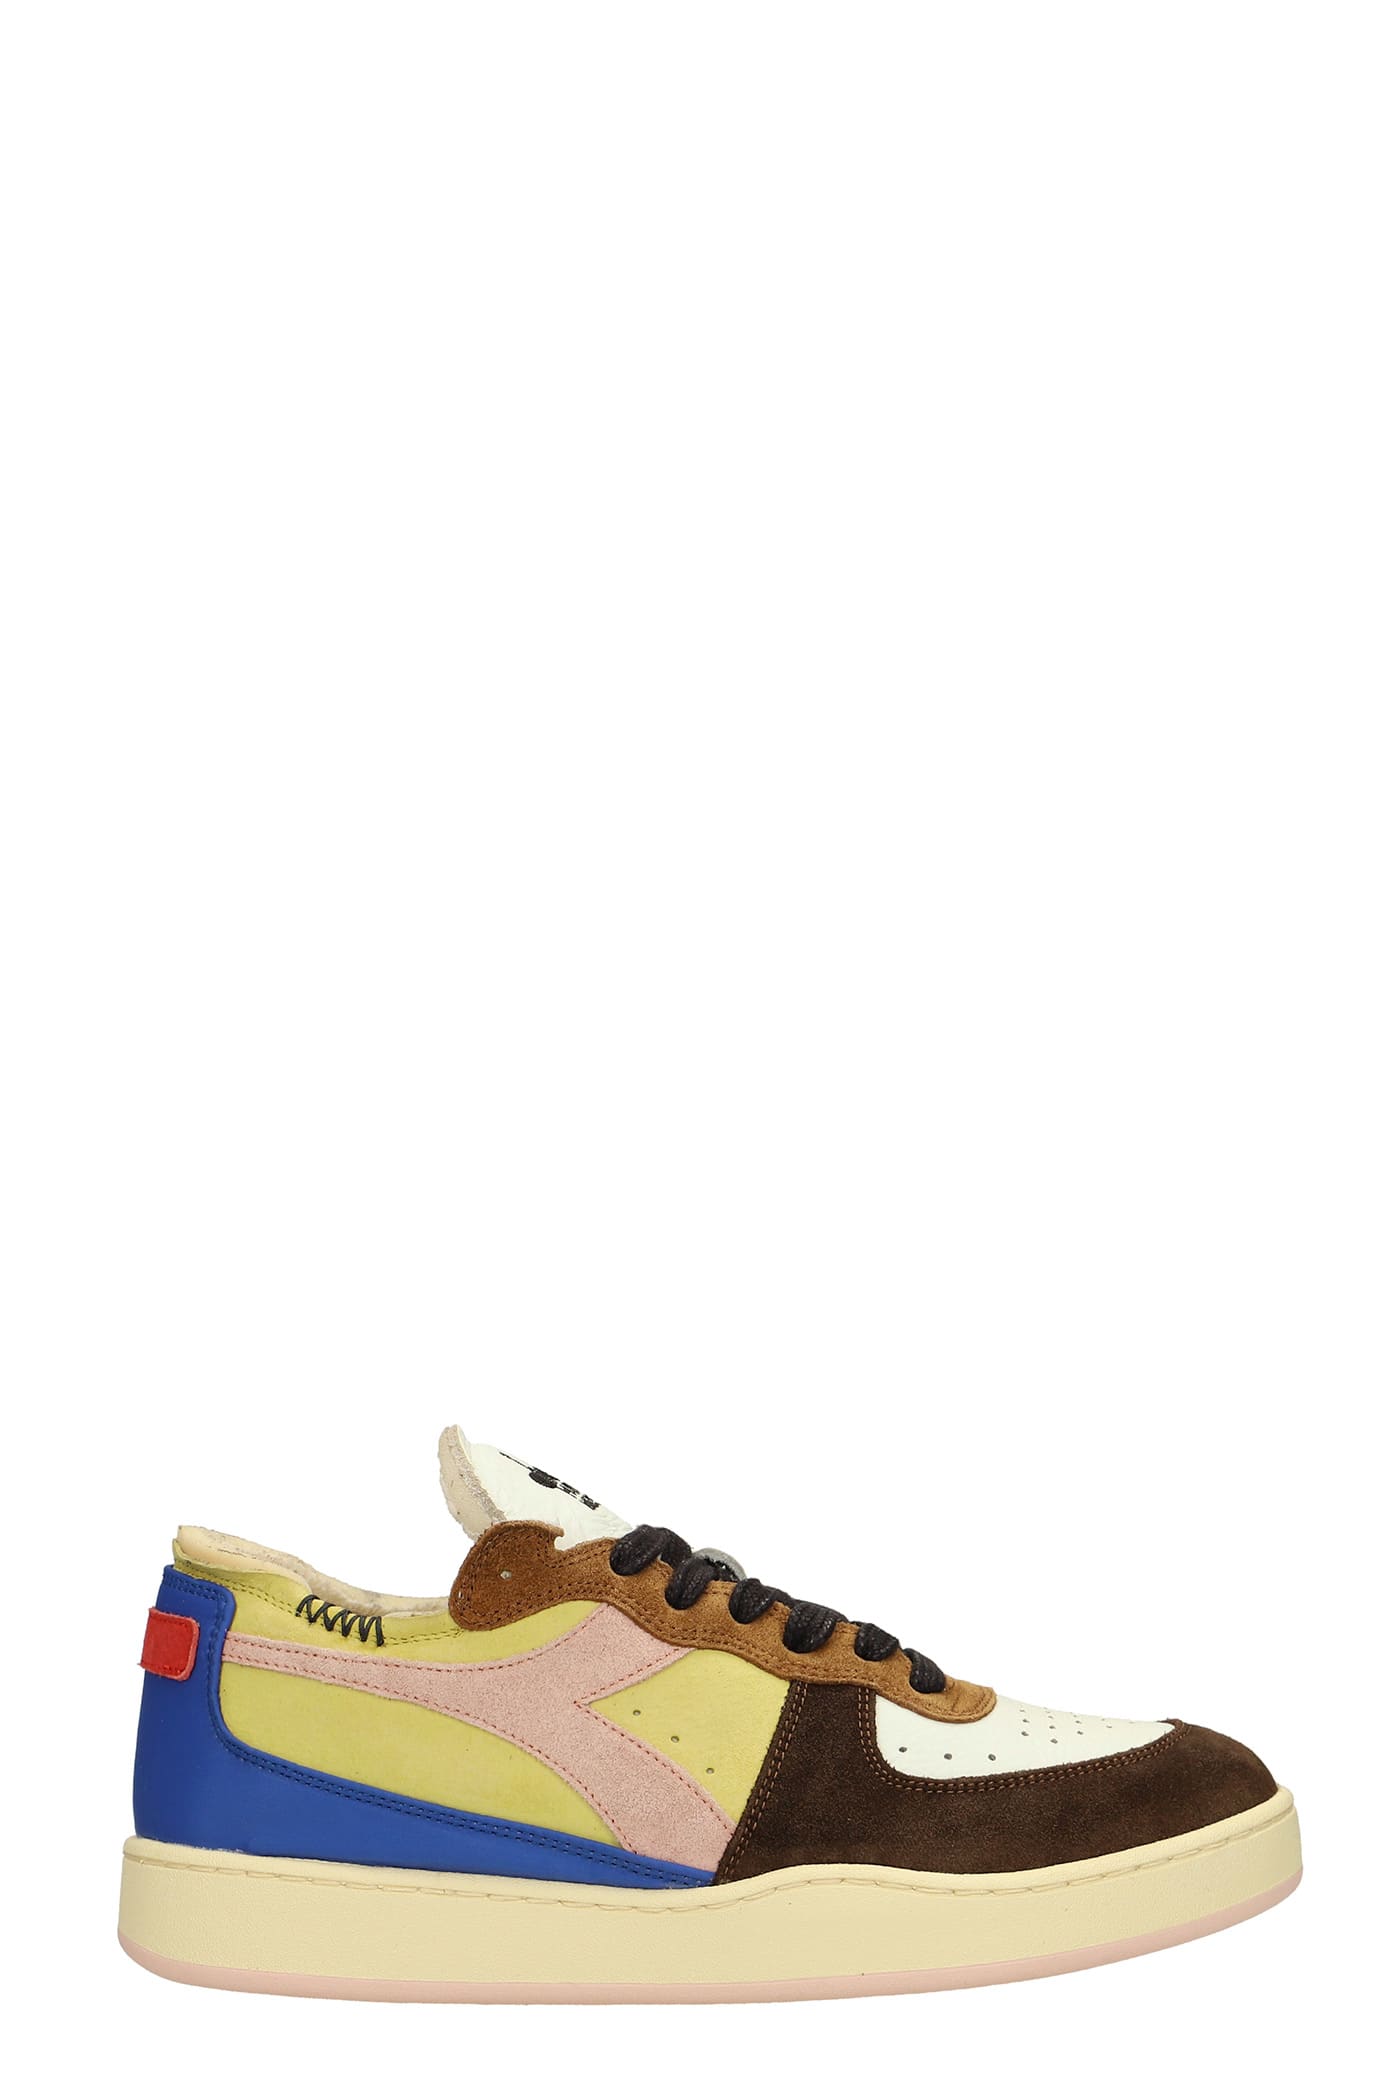 Diadora Mi Basket Sneakers In Yellow Suede And Leather